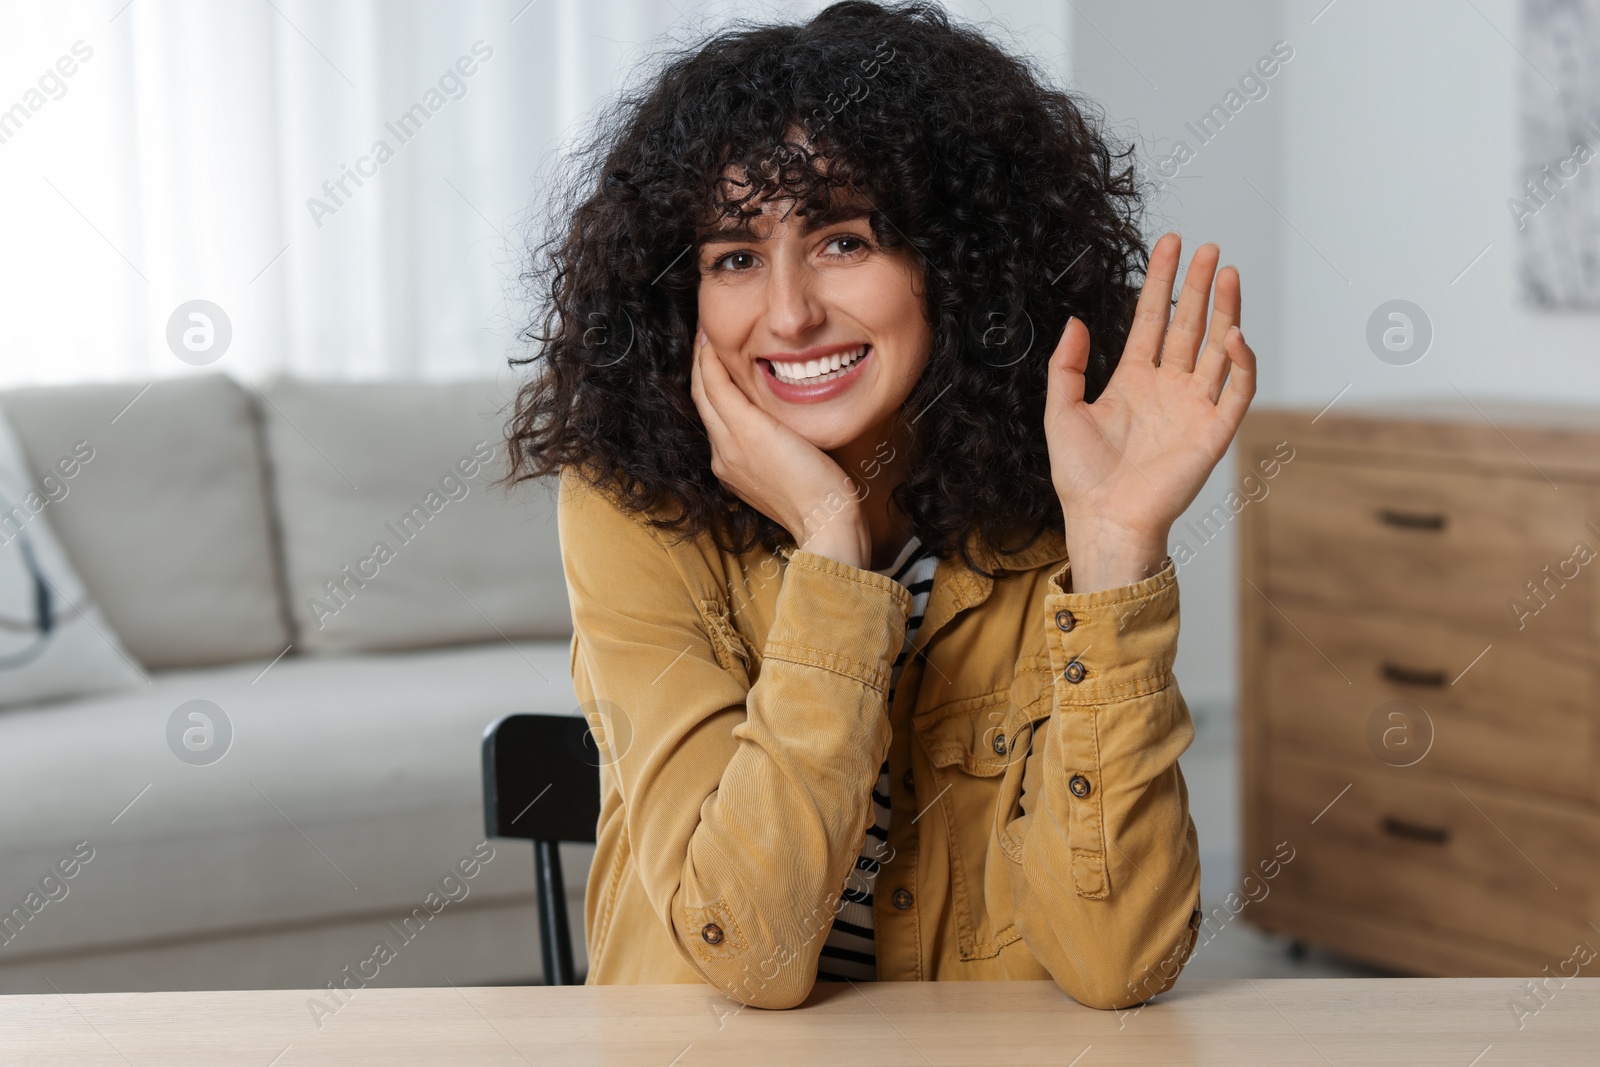 Photo of Happy woman waving hello at wooden table in room